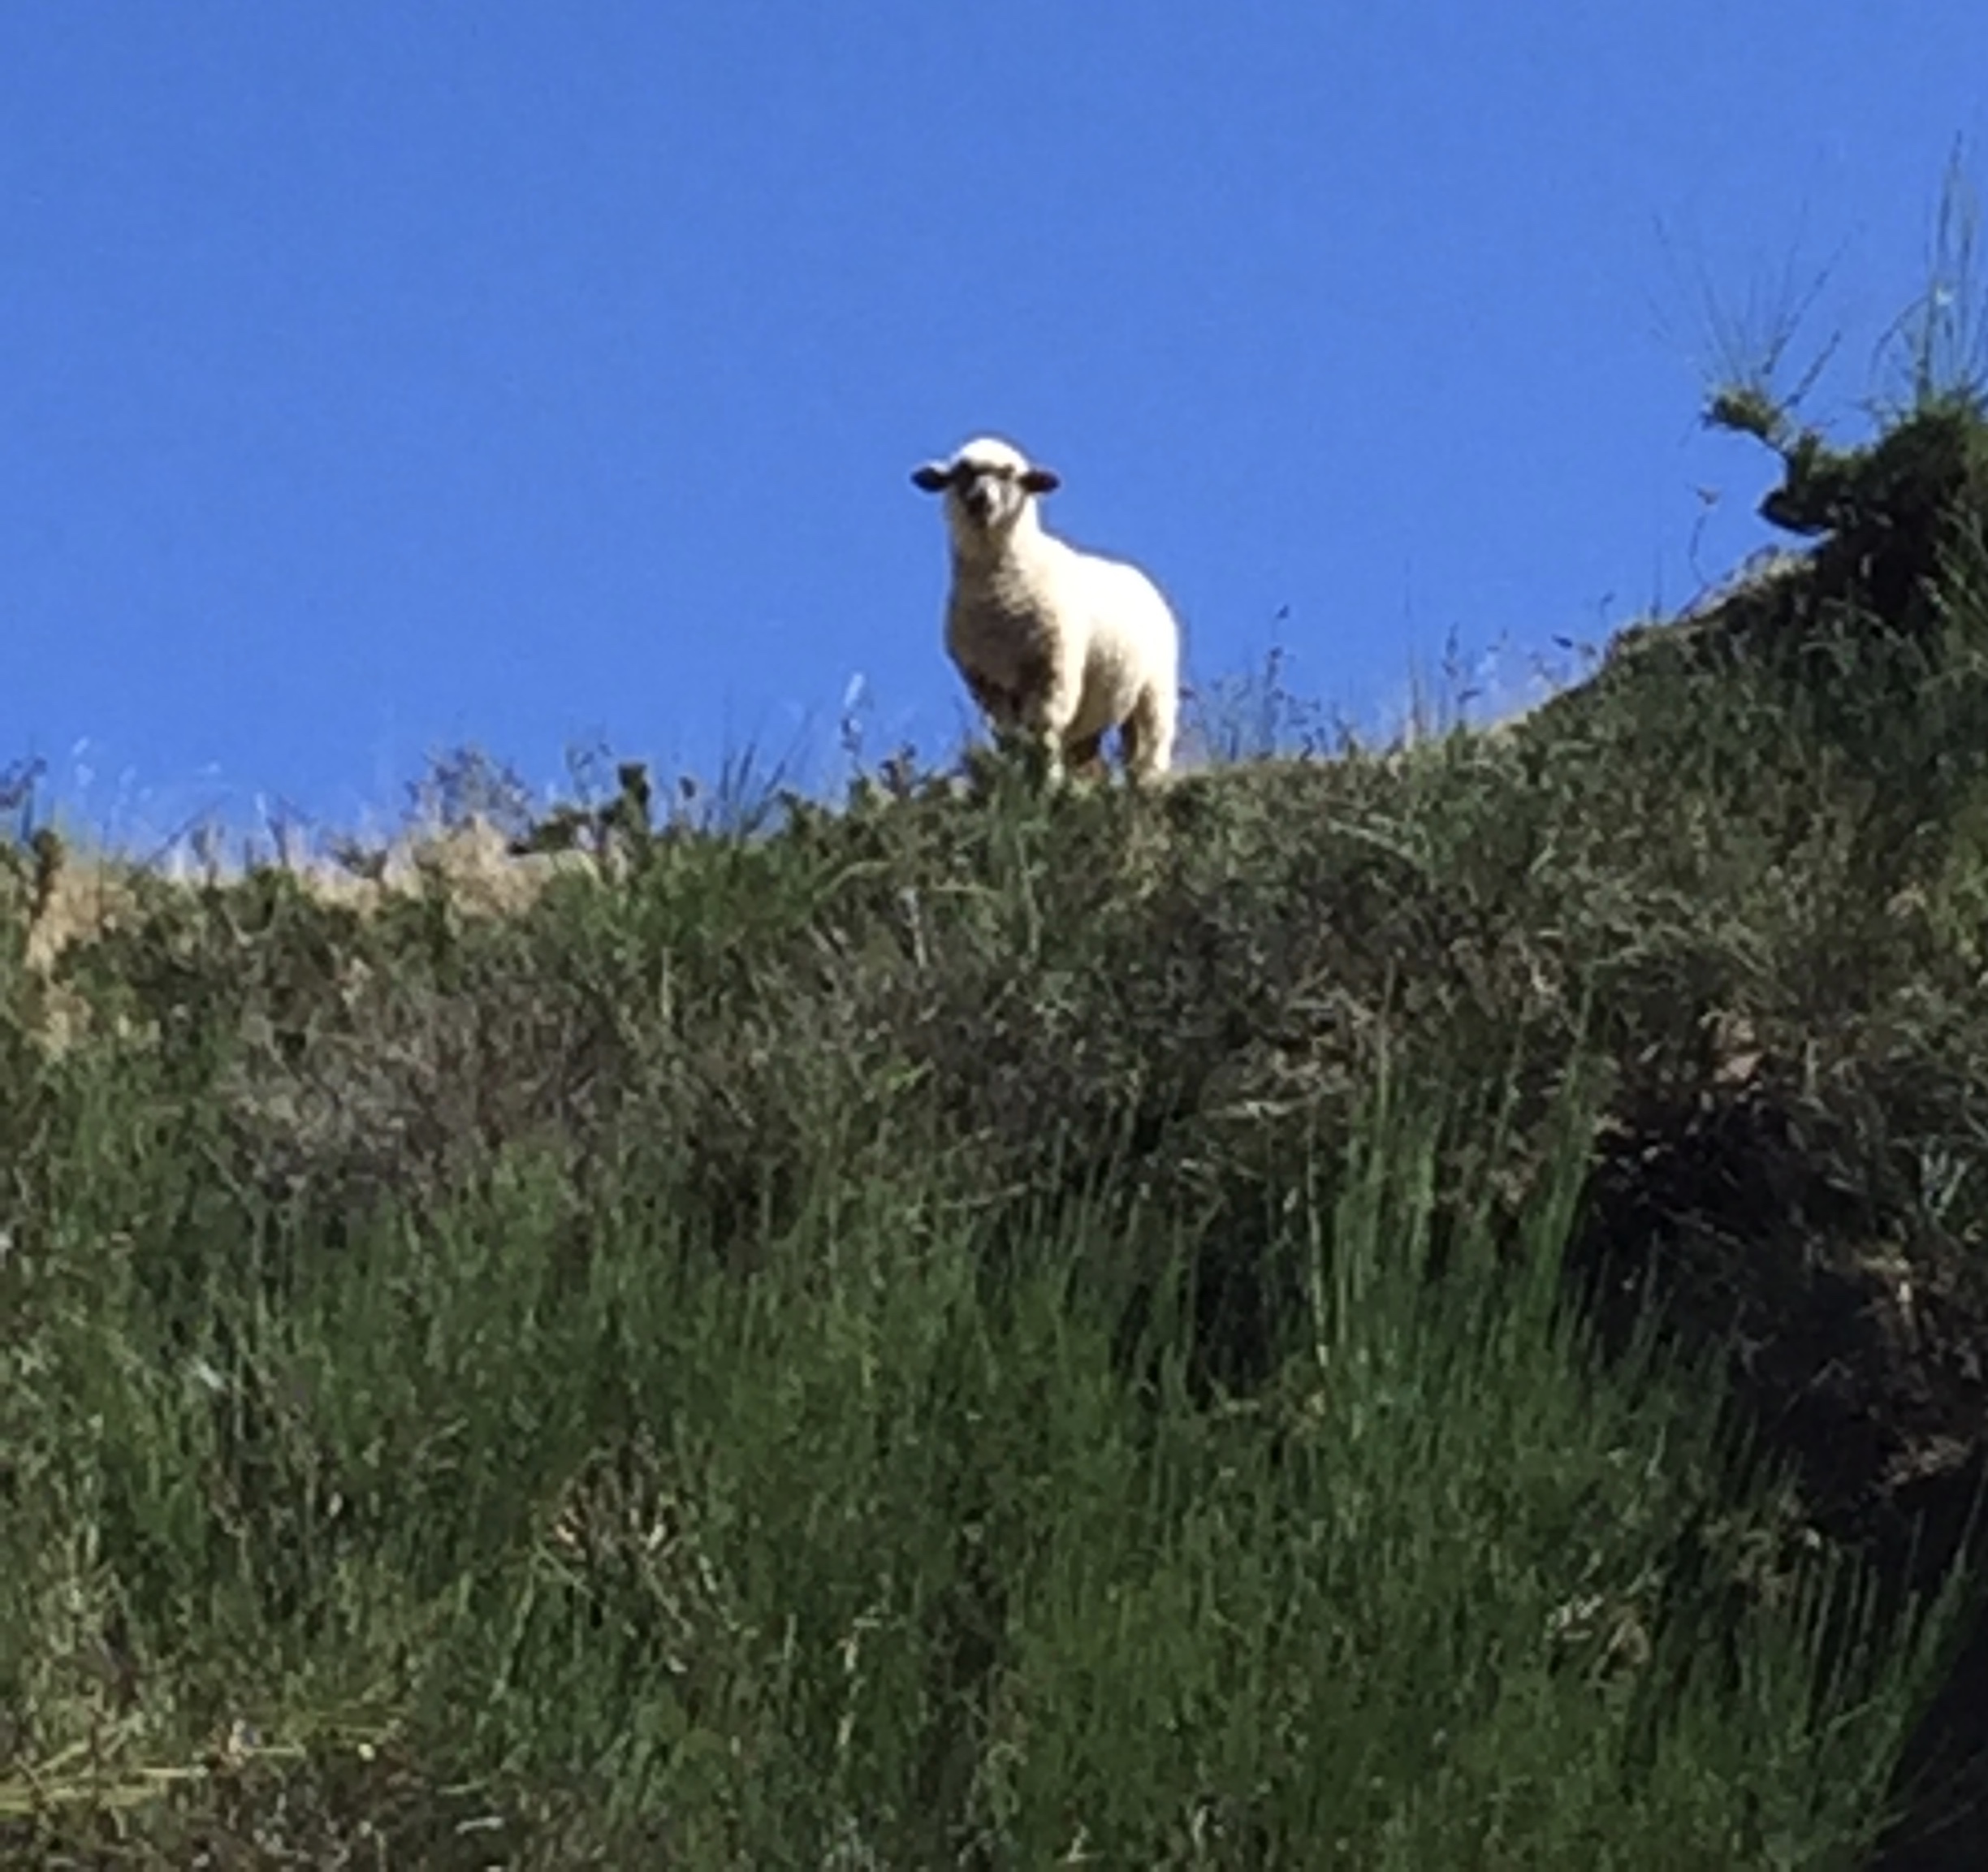 The sheep were watching us